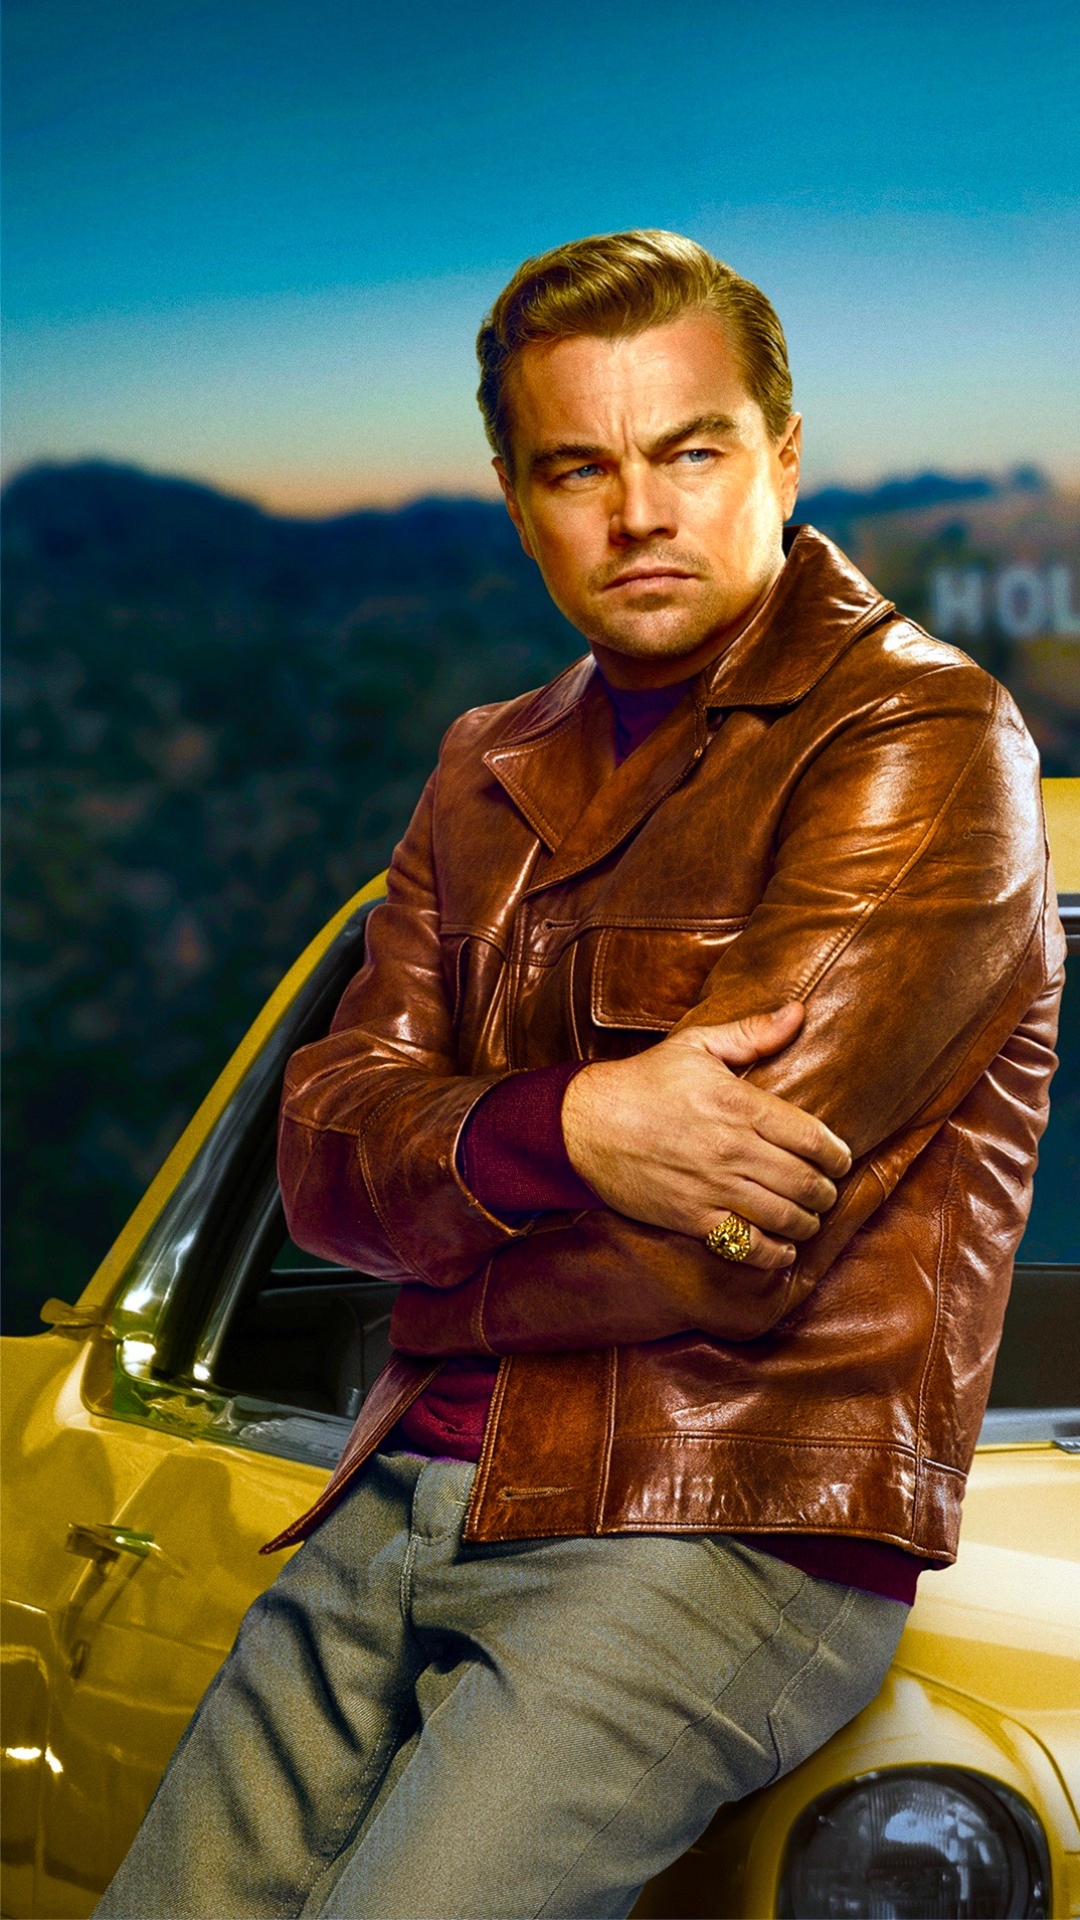 once upon a time in hollywood, movie, leonardo dicaprio UHD